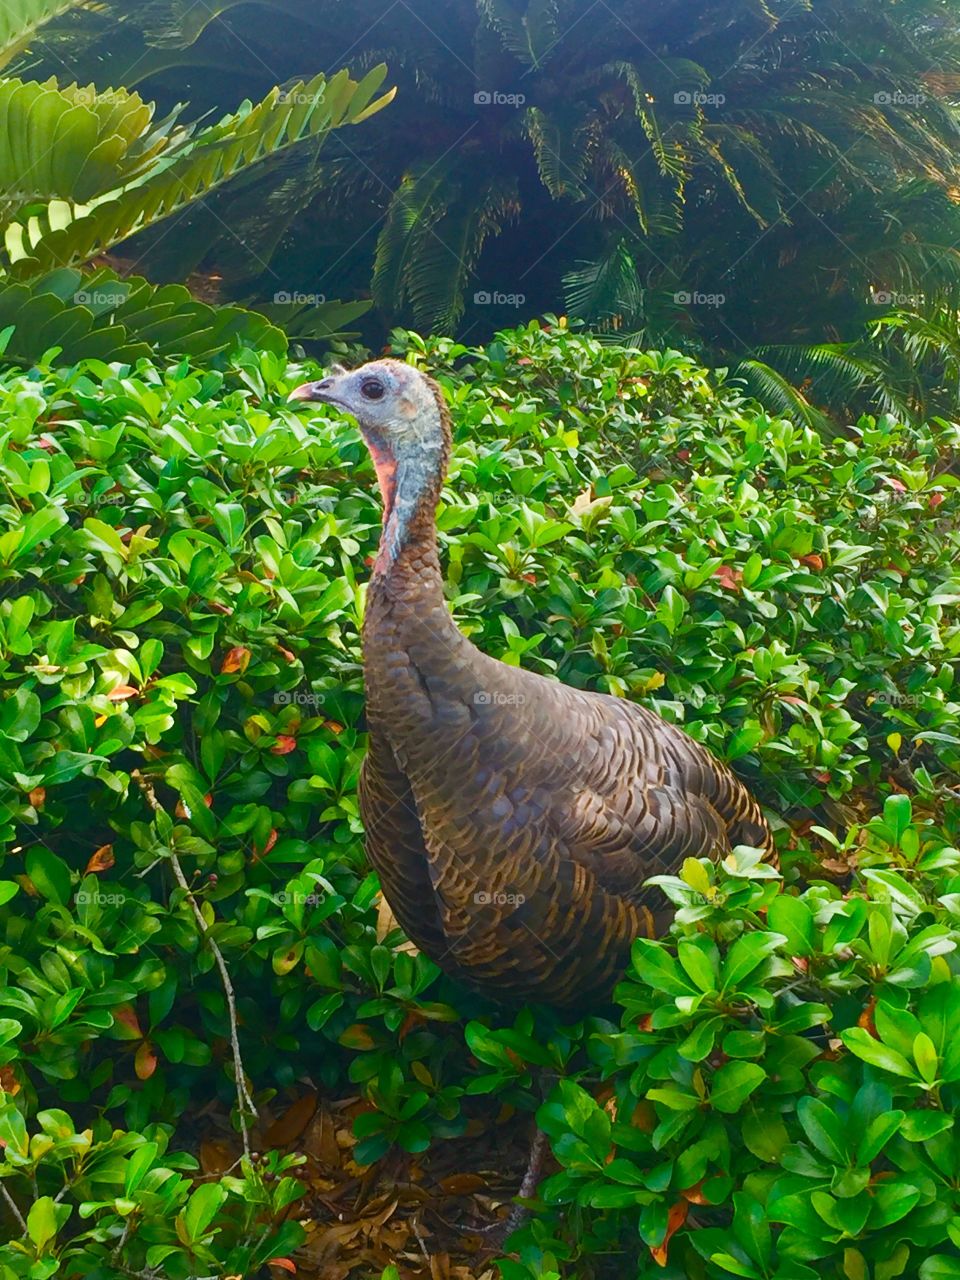 Tina the turkey  is stopping by to say hi! 